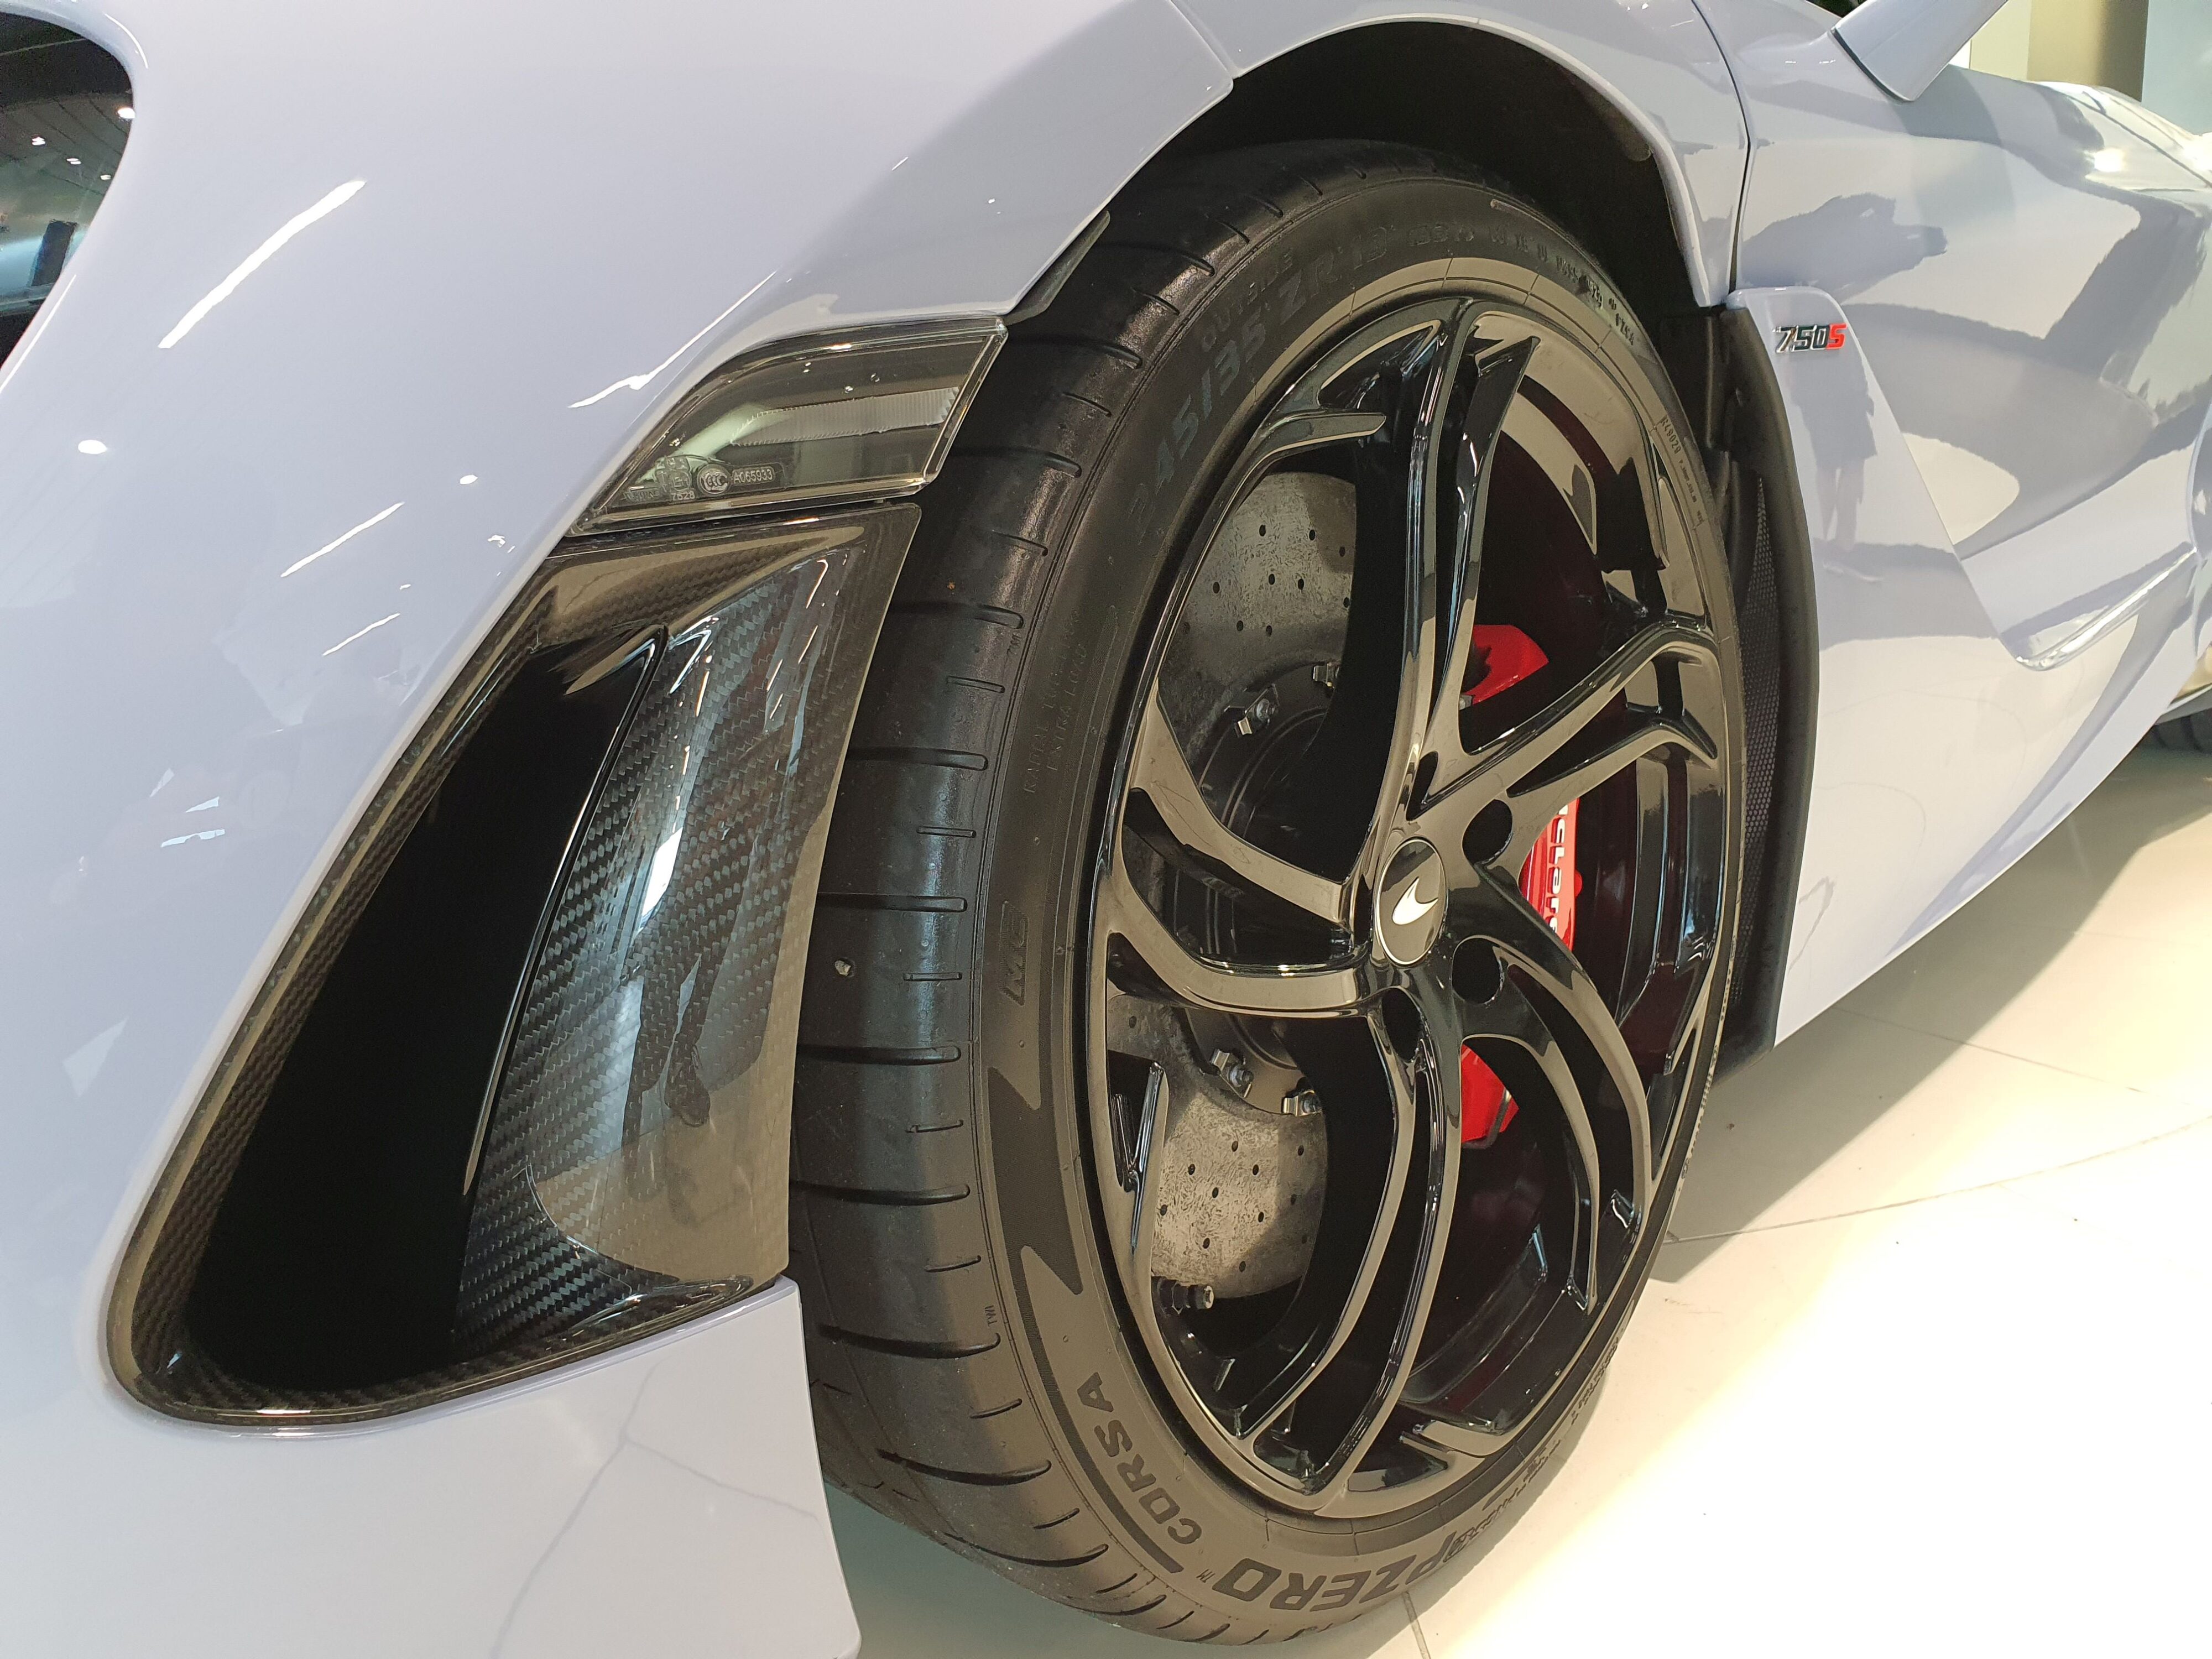 Photo of the 19 inch wheels on the new Mclaren 750S at McLaren Auckland.